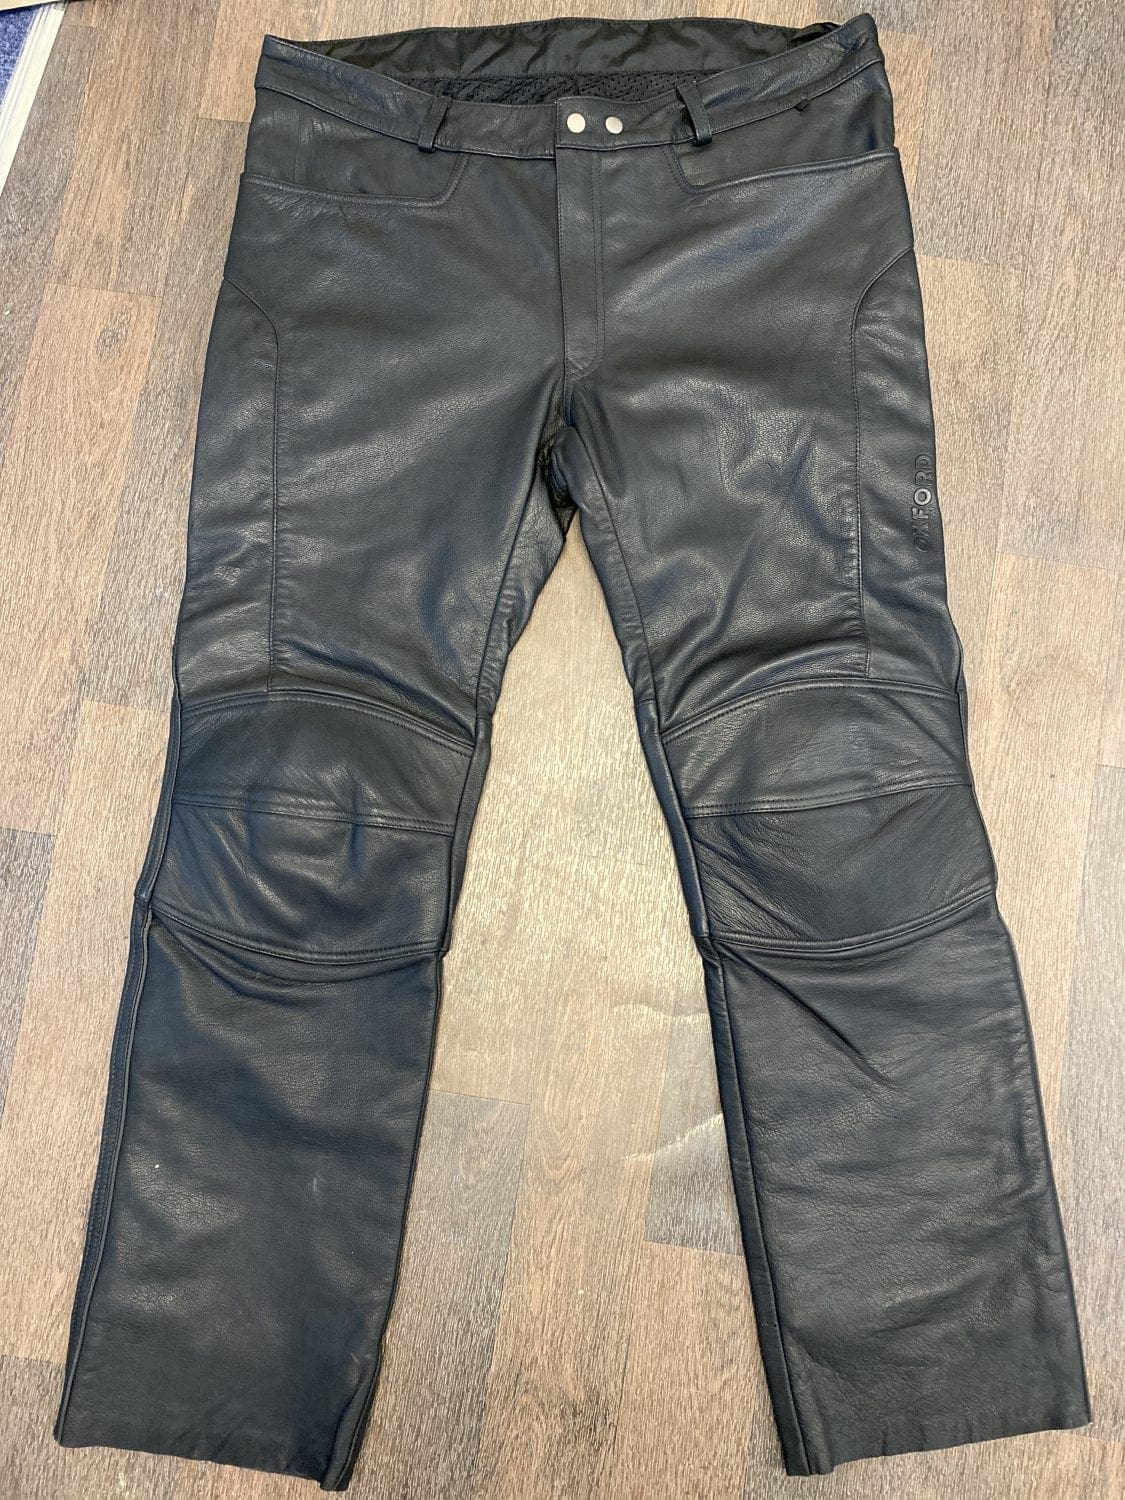 Oxford motorcycle jacket and trousers for sale in Co Cork for 150 on  DoneDeal